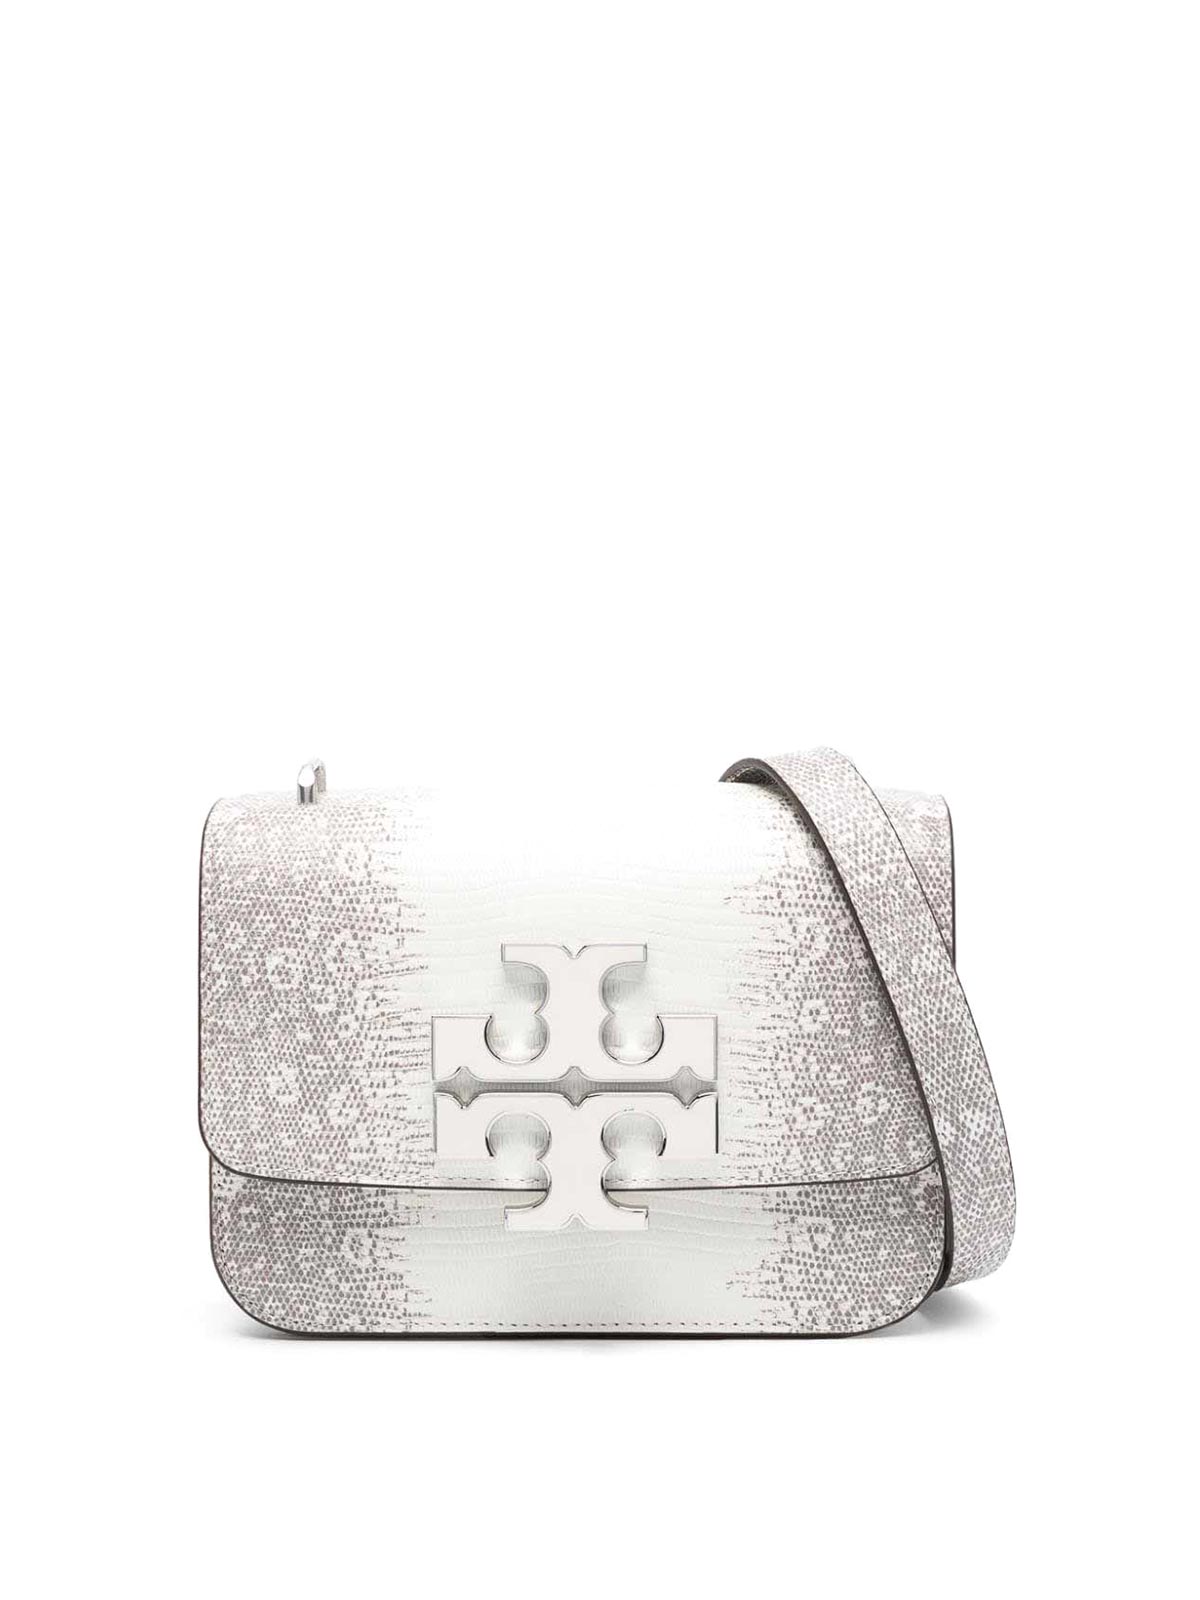 TORY BURCH - Eleanor Small Leahter Shoulder Bag